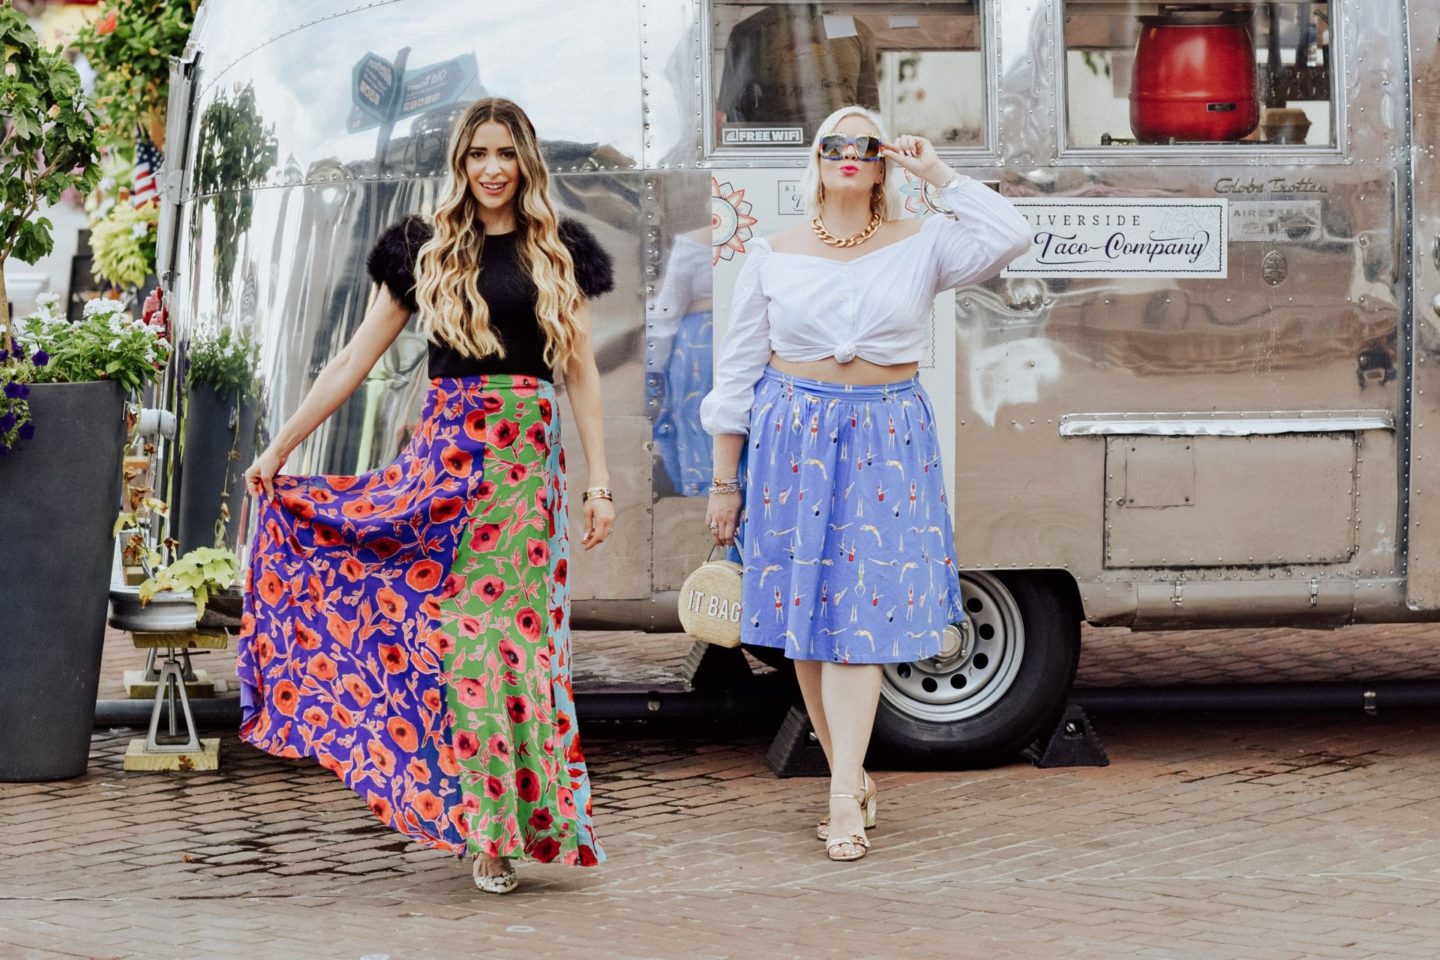 comparing yourself to others is what these two fashion bloggers say